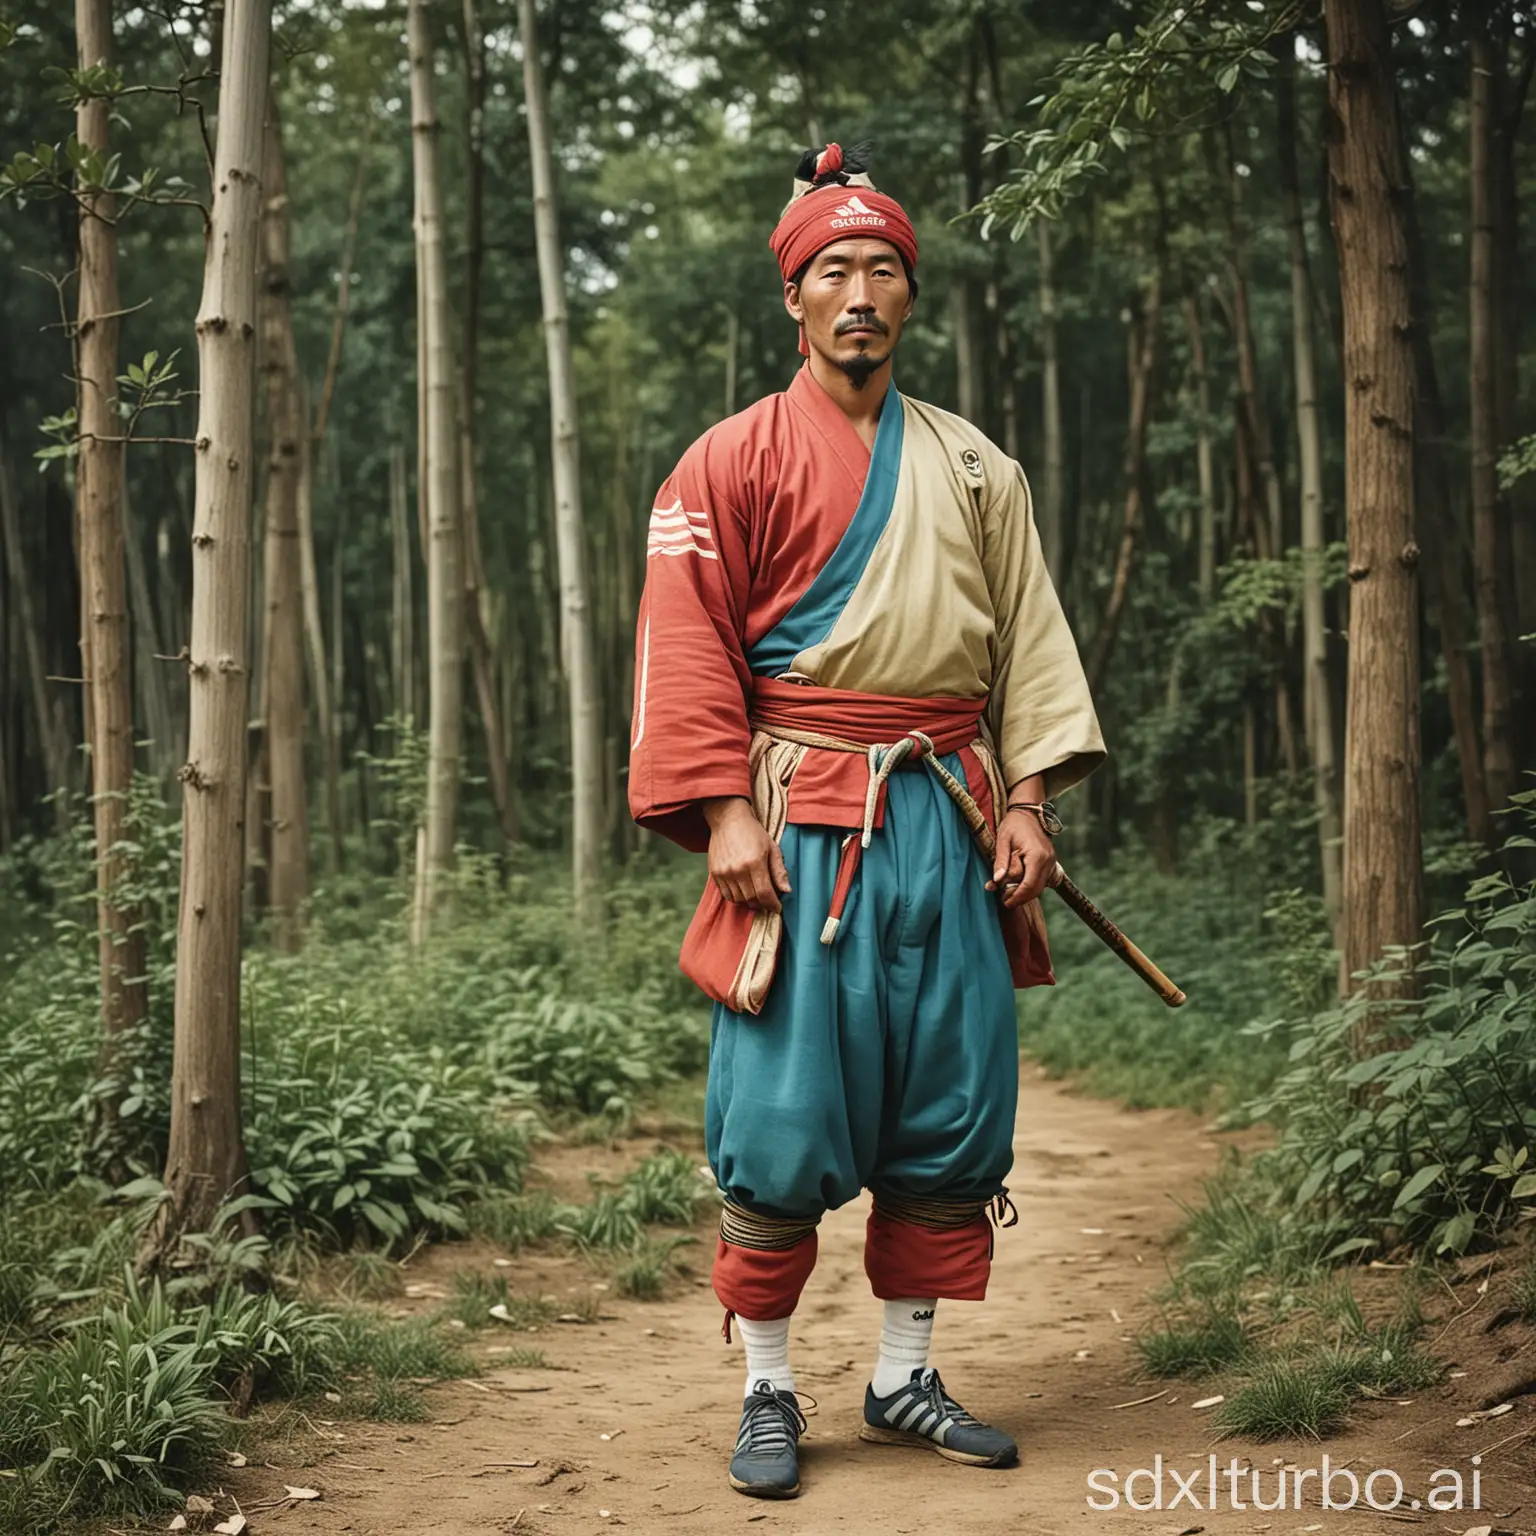 vintage photograph of a rural Versailles ronin man wearing adidas color and brand, circa 1867, colorized